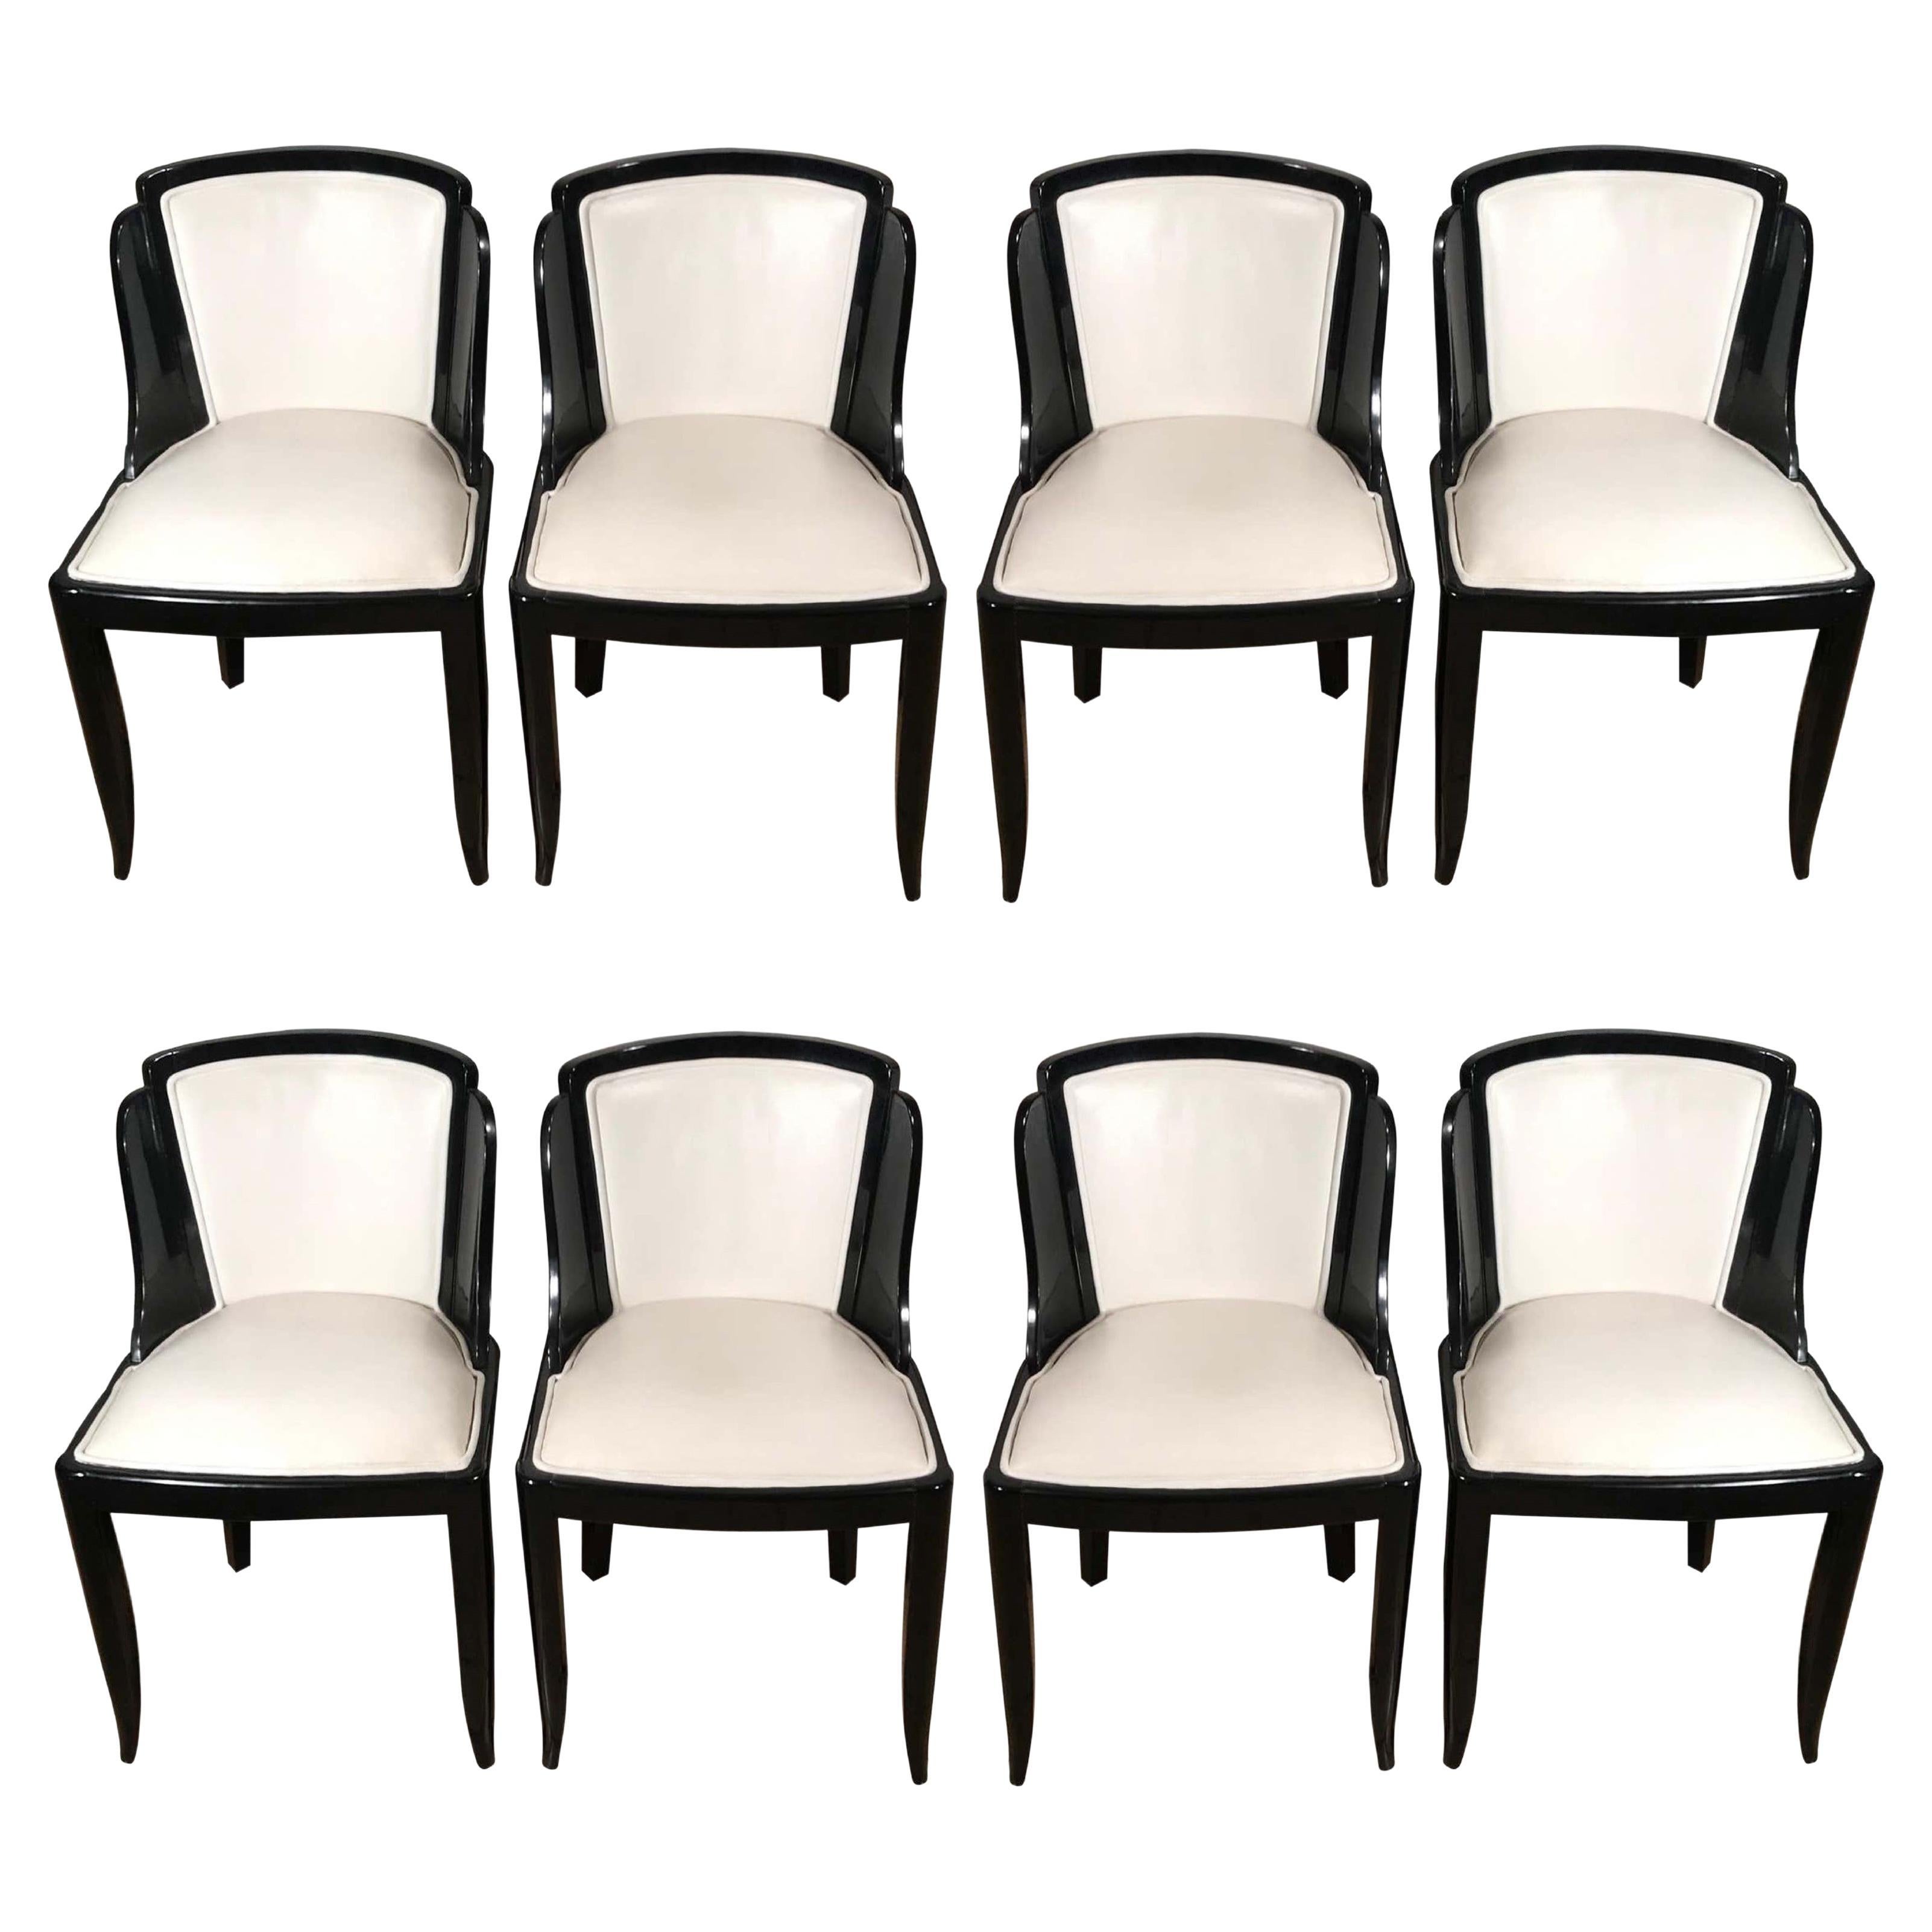 Eight Art Déco White Leather & Black Lacquered Chairs, circa 1920